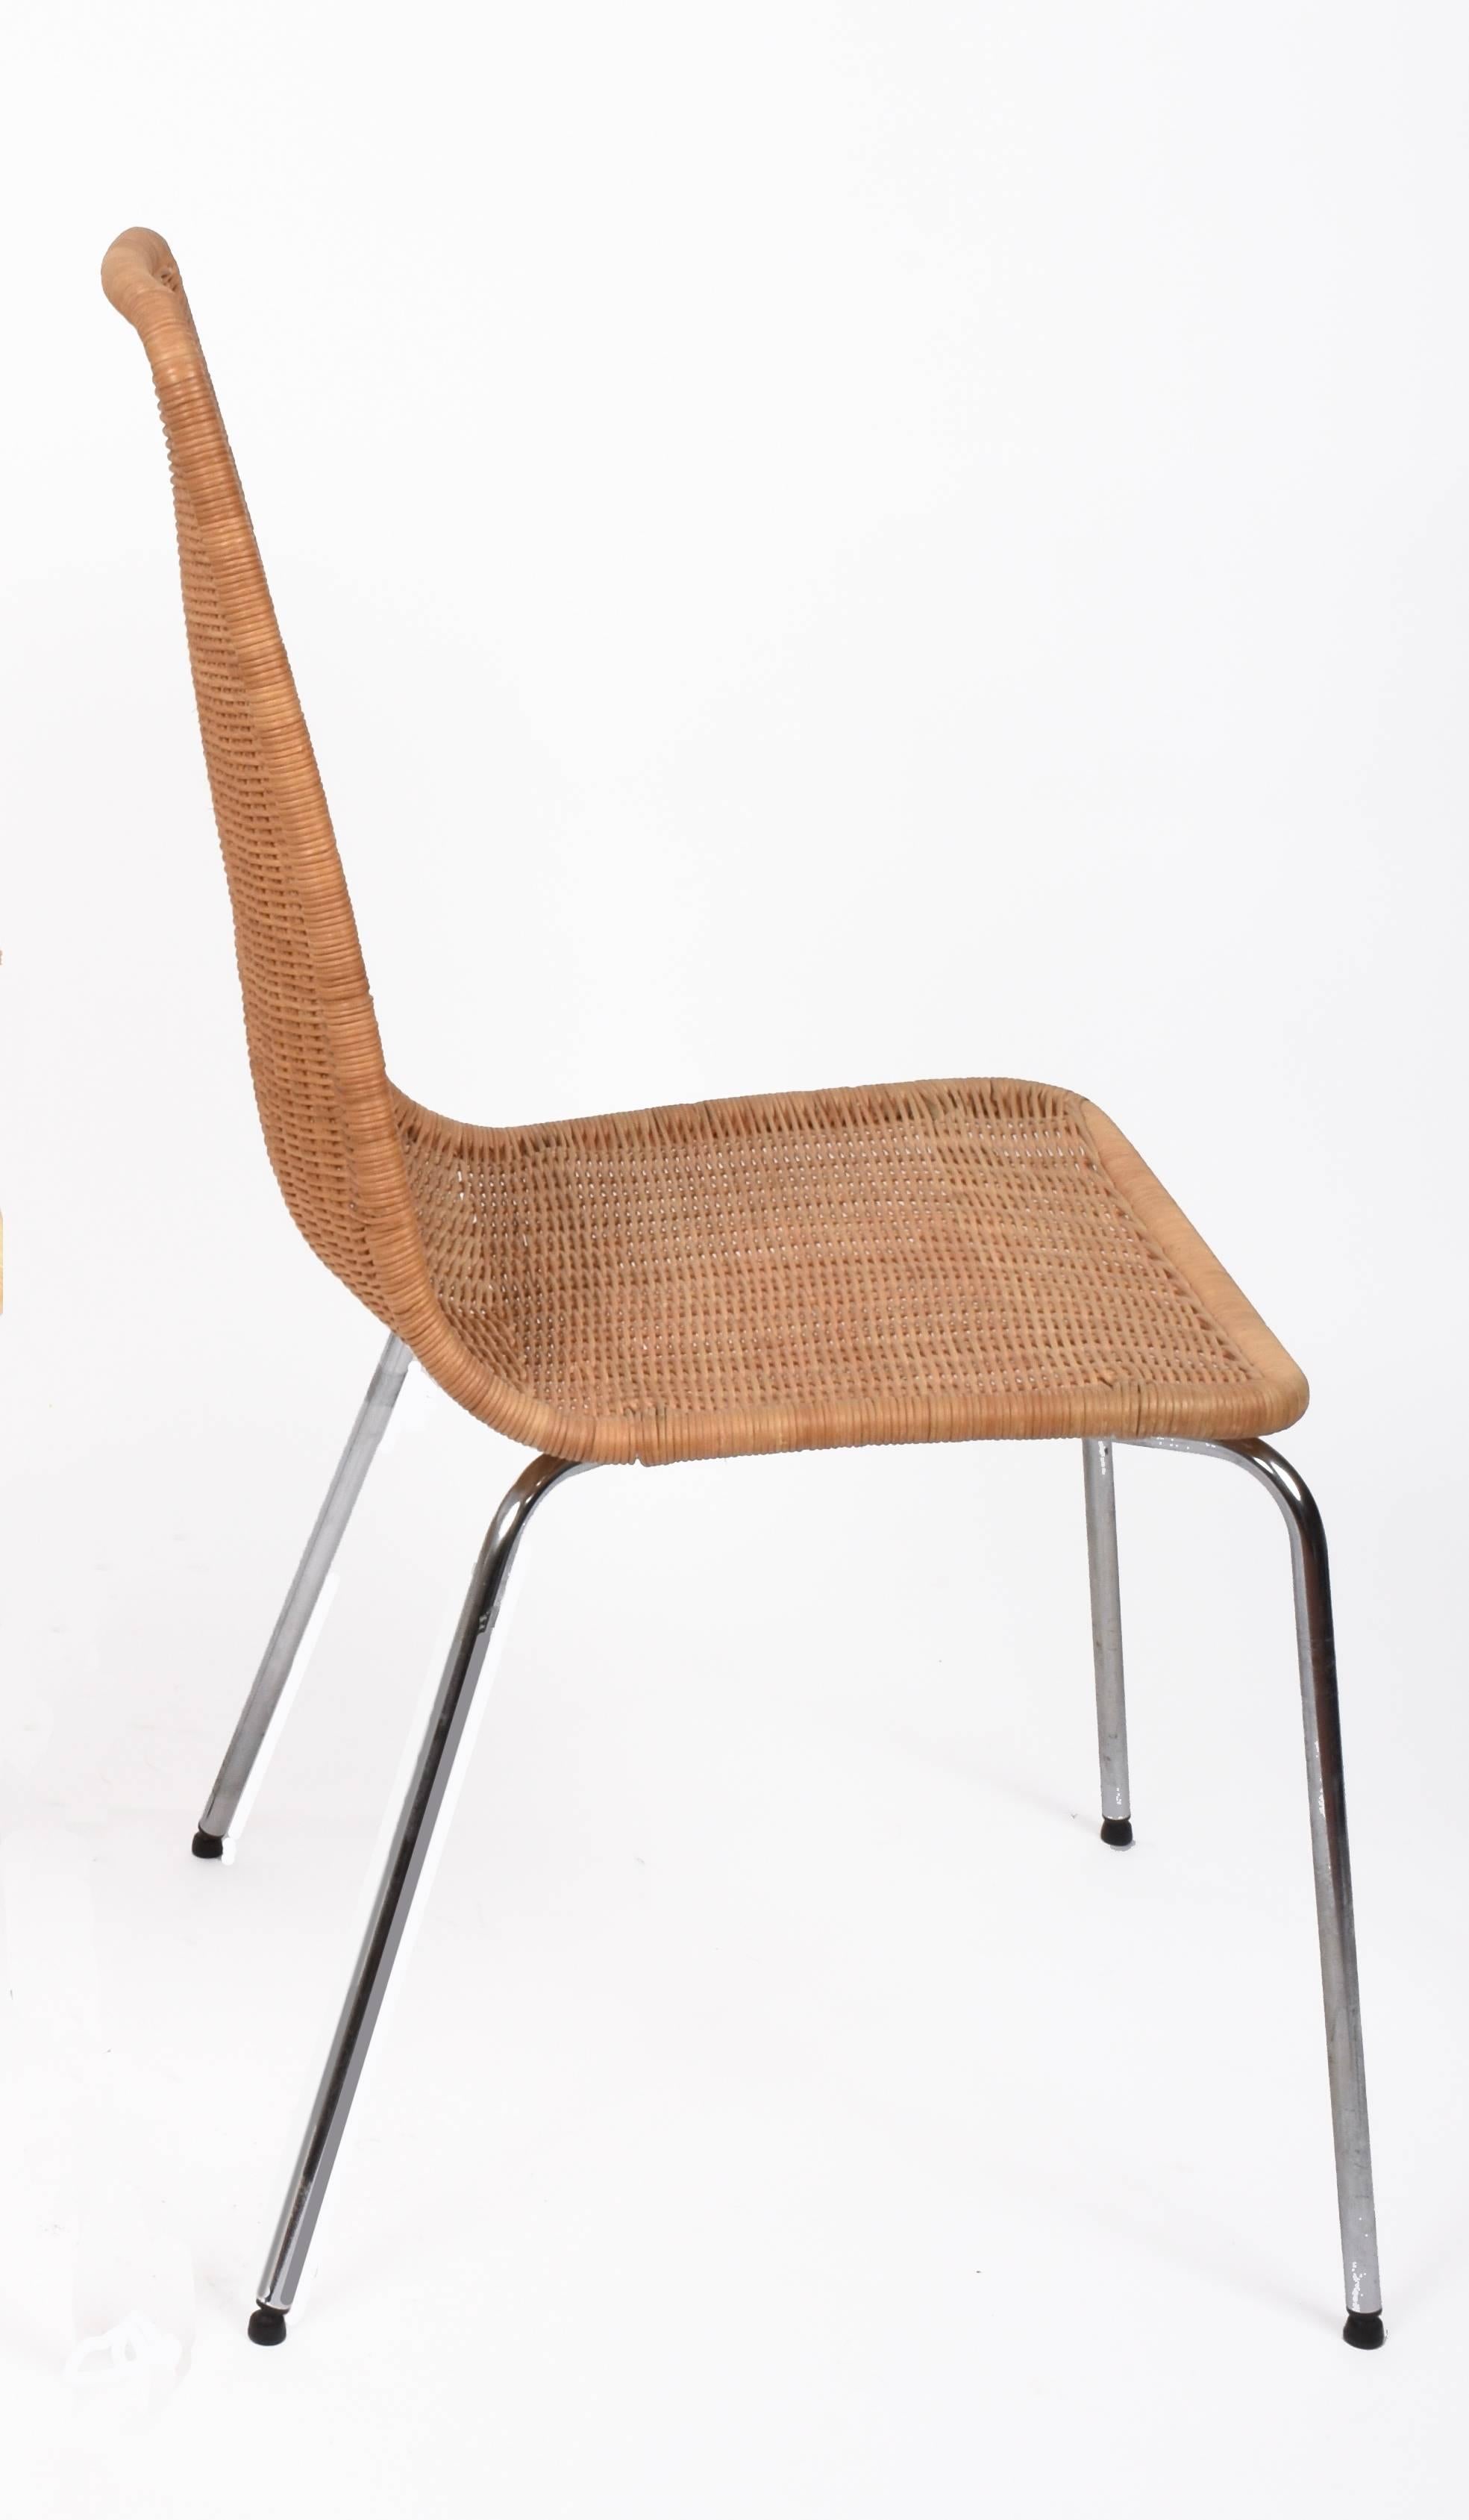 Mid-Century Modern Midcentury Removable Rattan Wicker and Chromed Metal Italian Chairs, 1970s